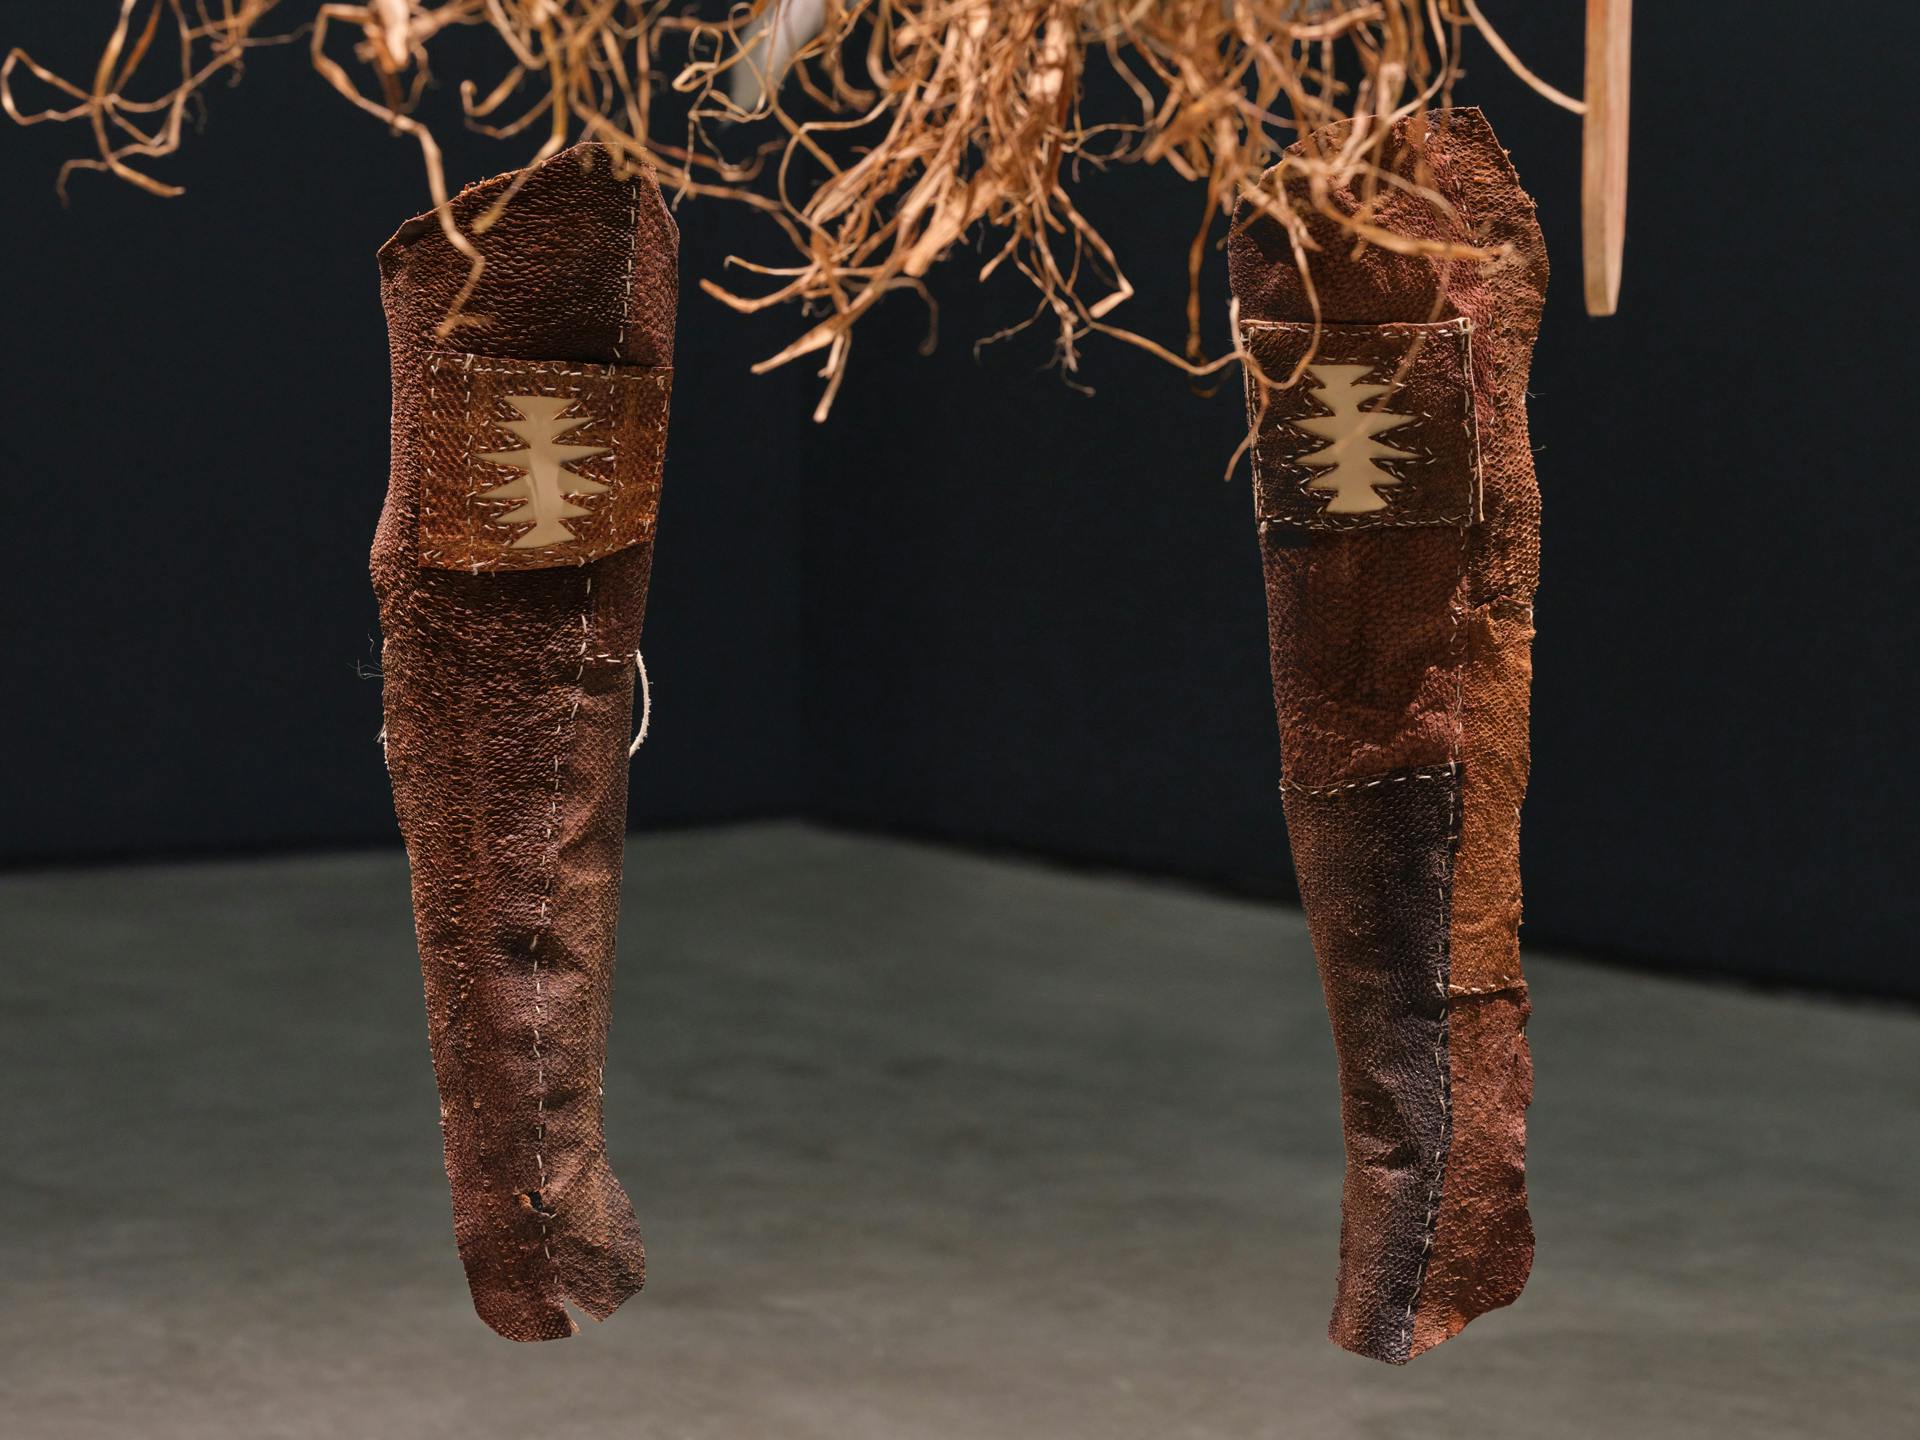 a pair of fishskin leather leg covers suspended behind the bottom of a cedar war apron. the knees of the leg covers feature a zig-zag patterned shape